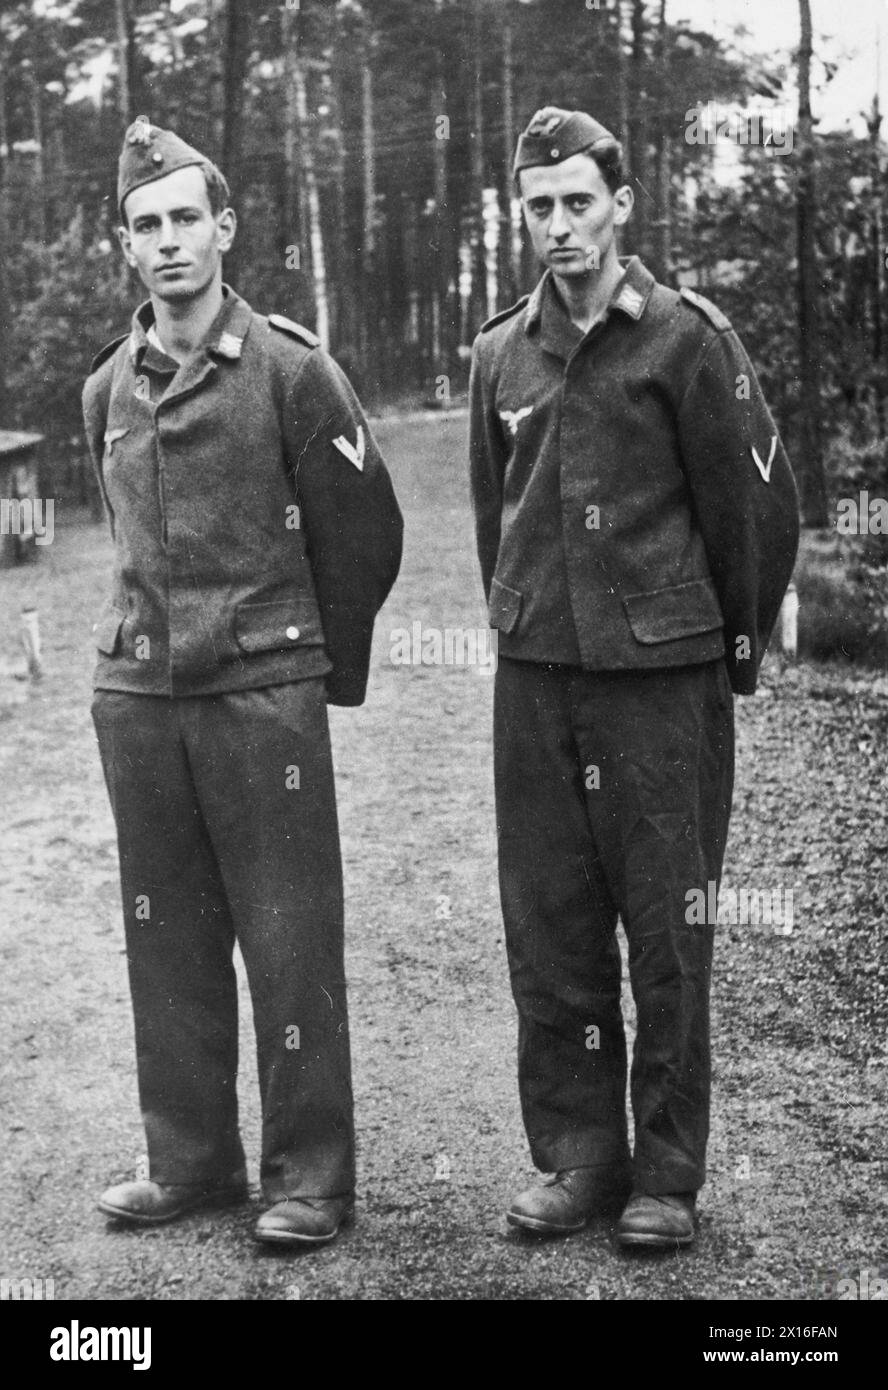 ALLIED PRISONERS OF WAR IN GERMANY, 1939-1945 - Two RAF officers, Patrick Lorne Welch and Flight Lieutenant Walter Morrison DFC, who tried to escape from Stalag Luft III, Sagan on 12 June 1943 (during so called delousing break) disguised as German airmen. Photograph taken just after their recapture on the aerodrome near Sagan, probably 12 June 1943 Royal Air Force, Welch, Patrick Palles Lorne Elphinstone, Morrison, Walter McDonald Stock Photo